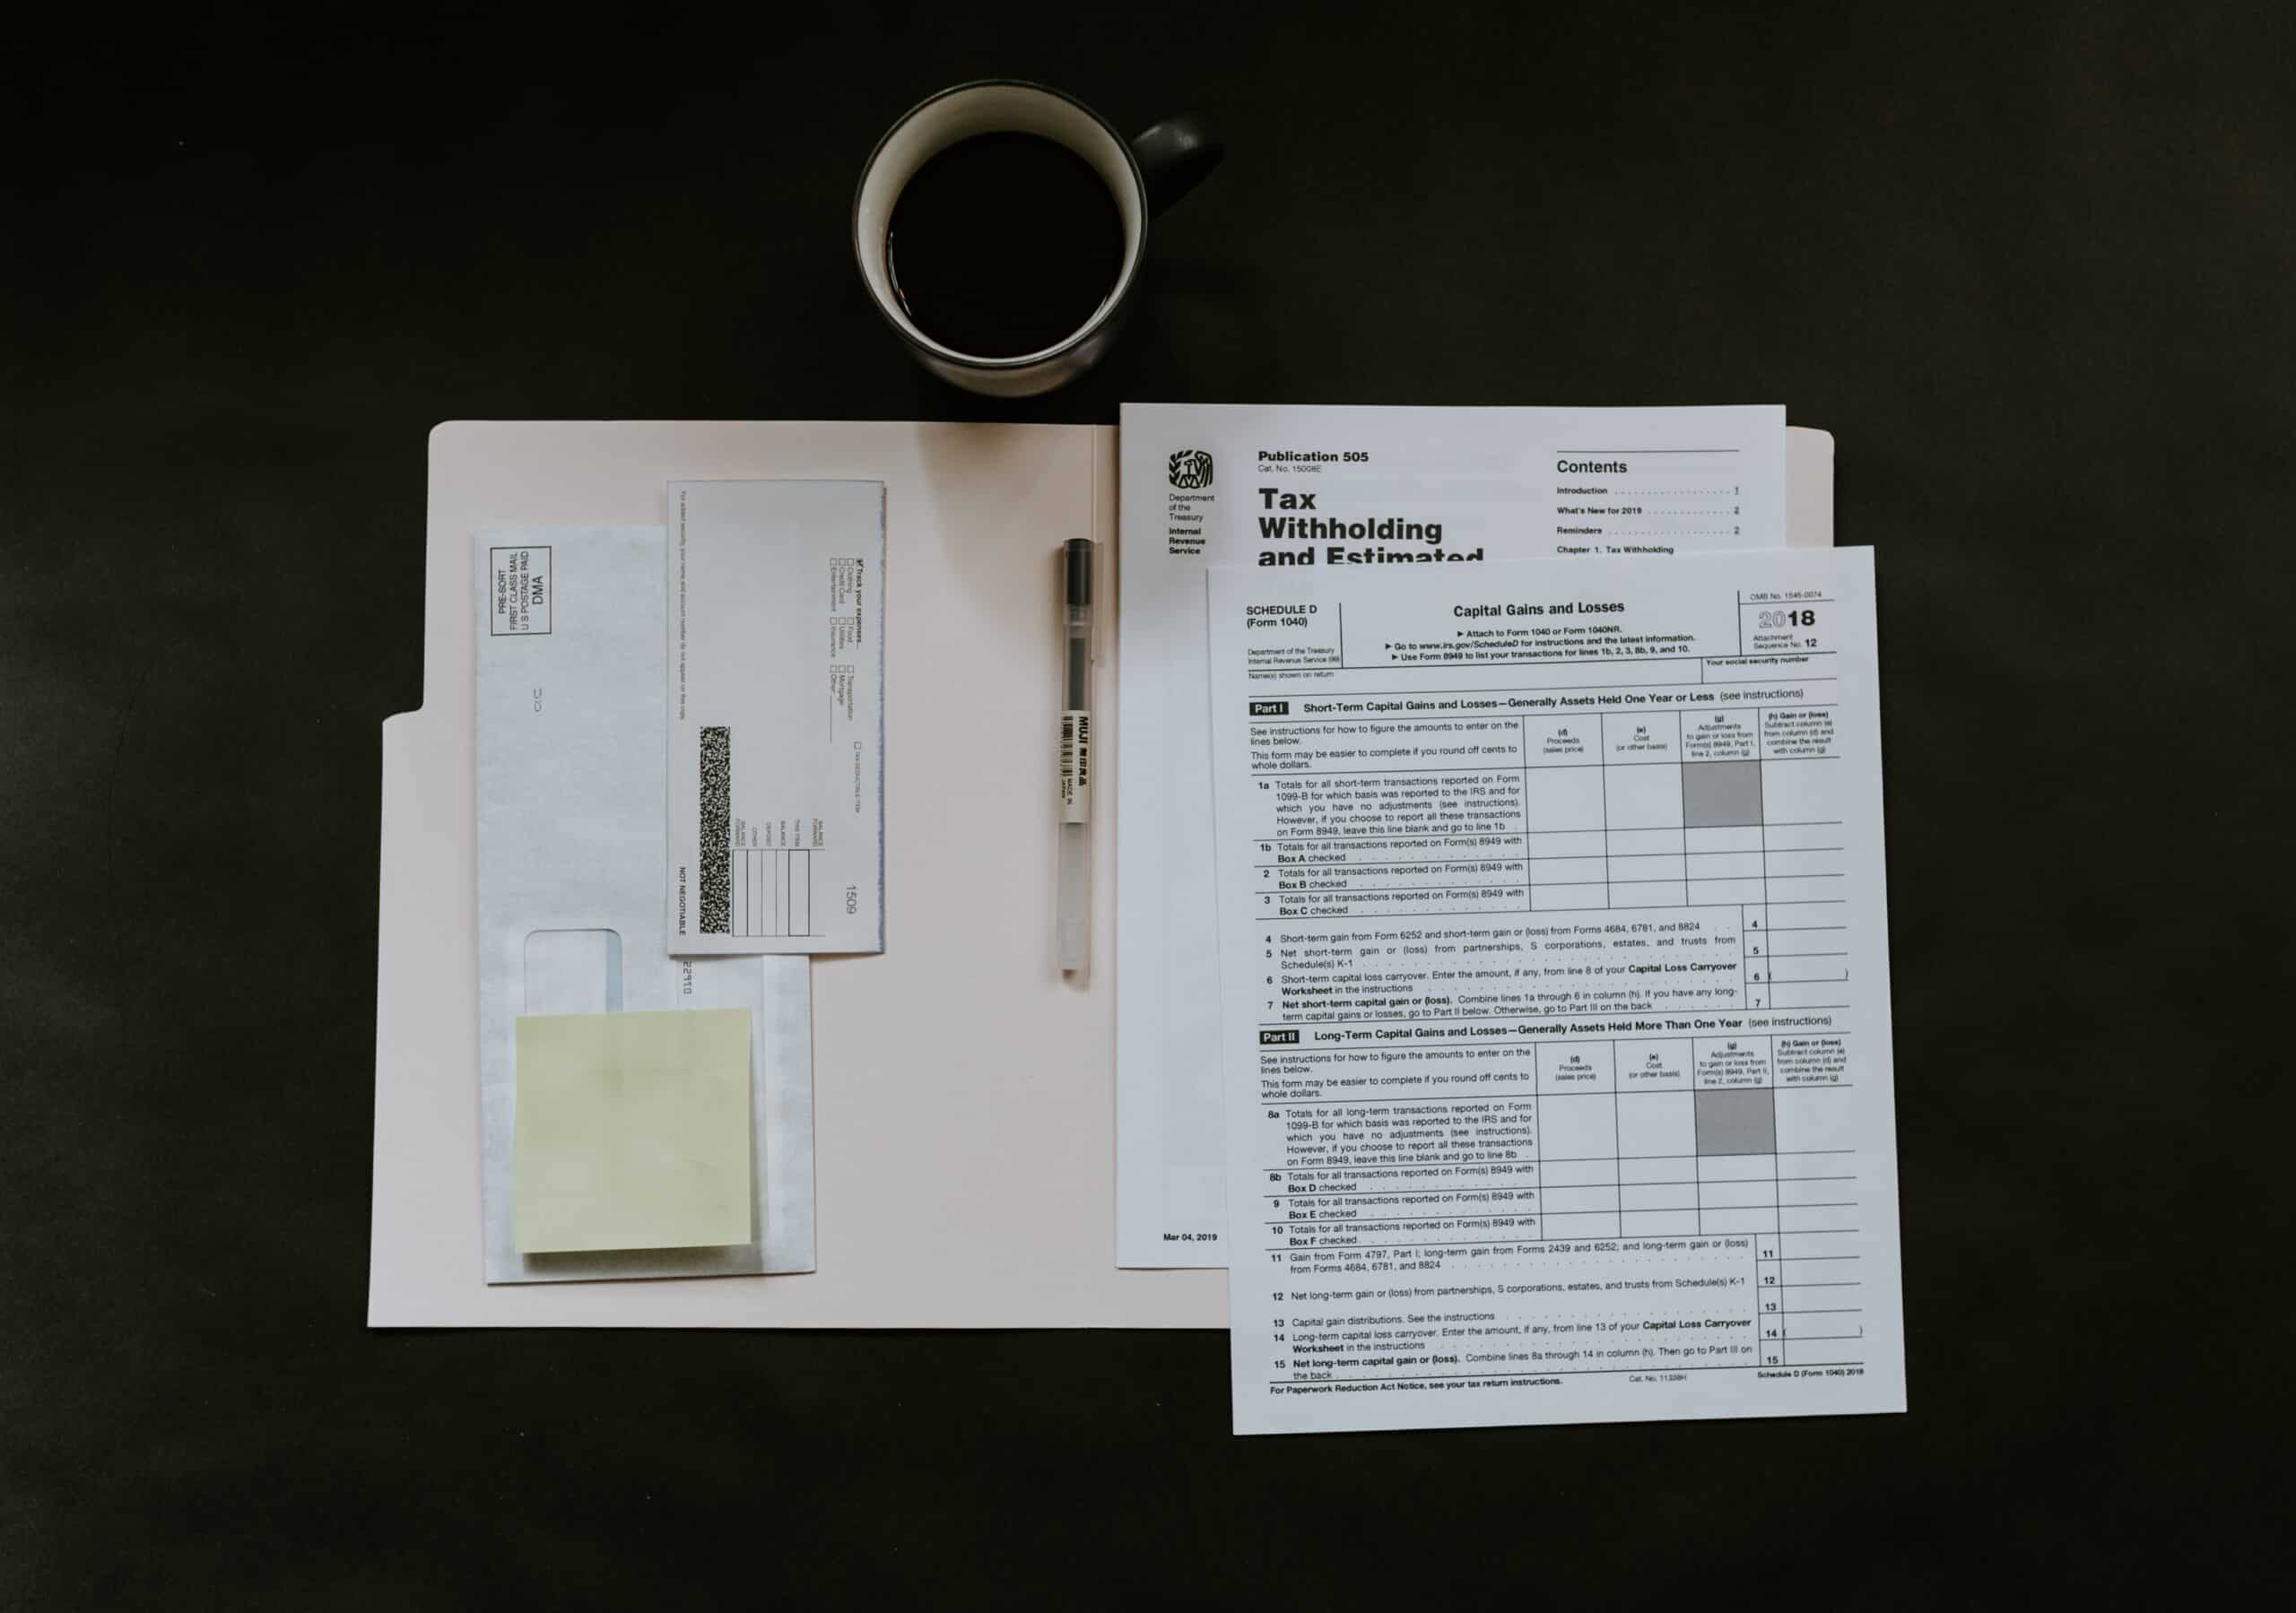 Tax documents and a cup of coffee